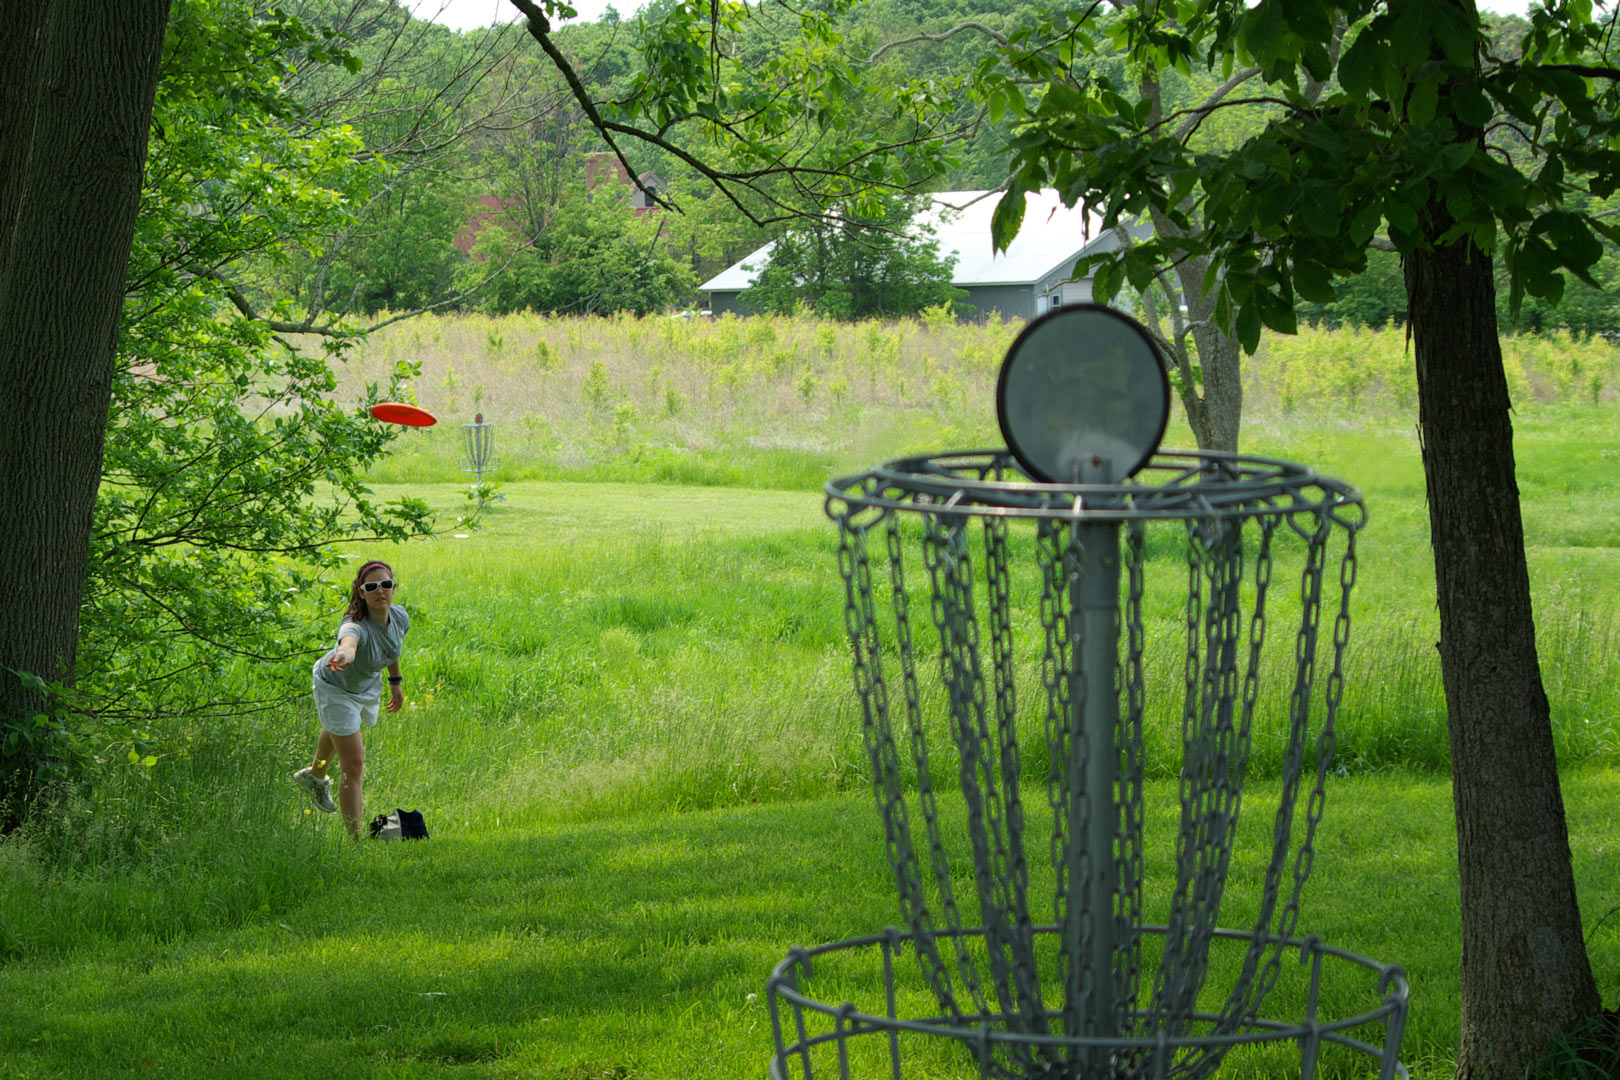 A player on the disc golf course at Glacier Ridge